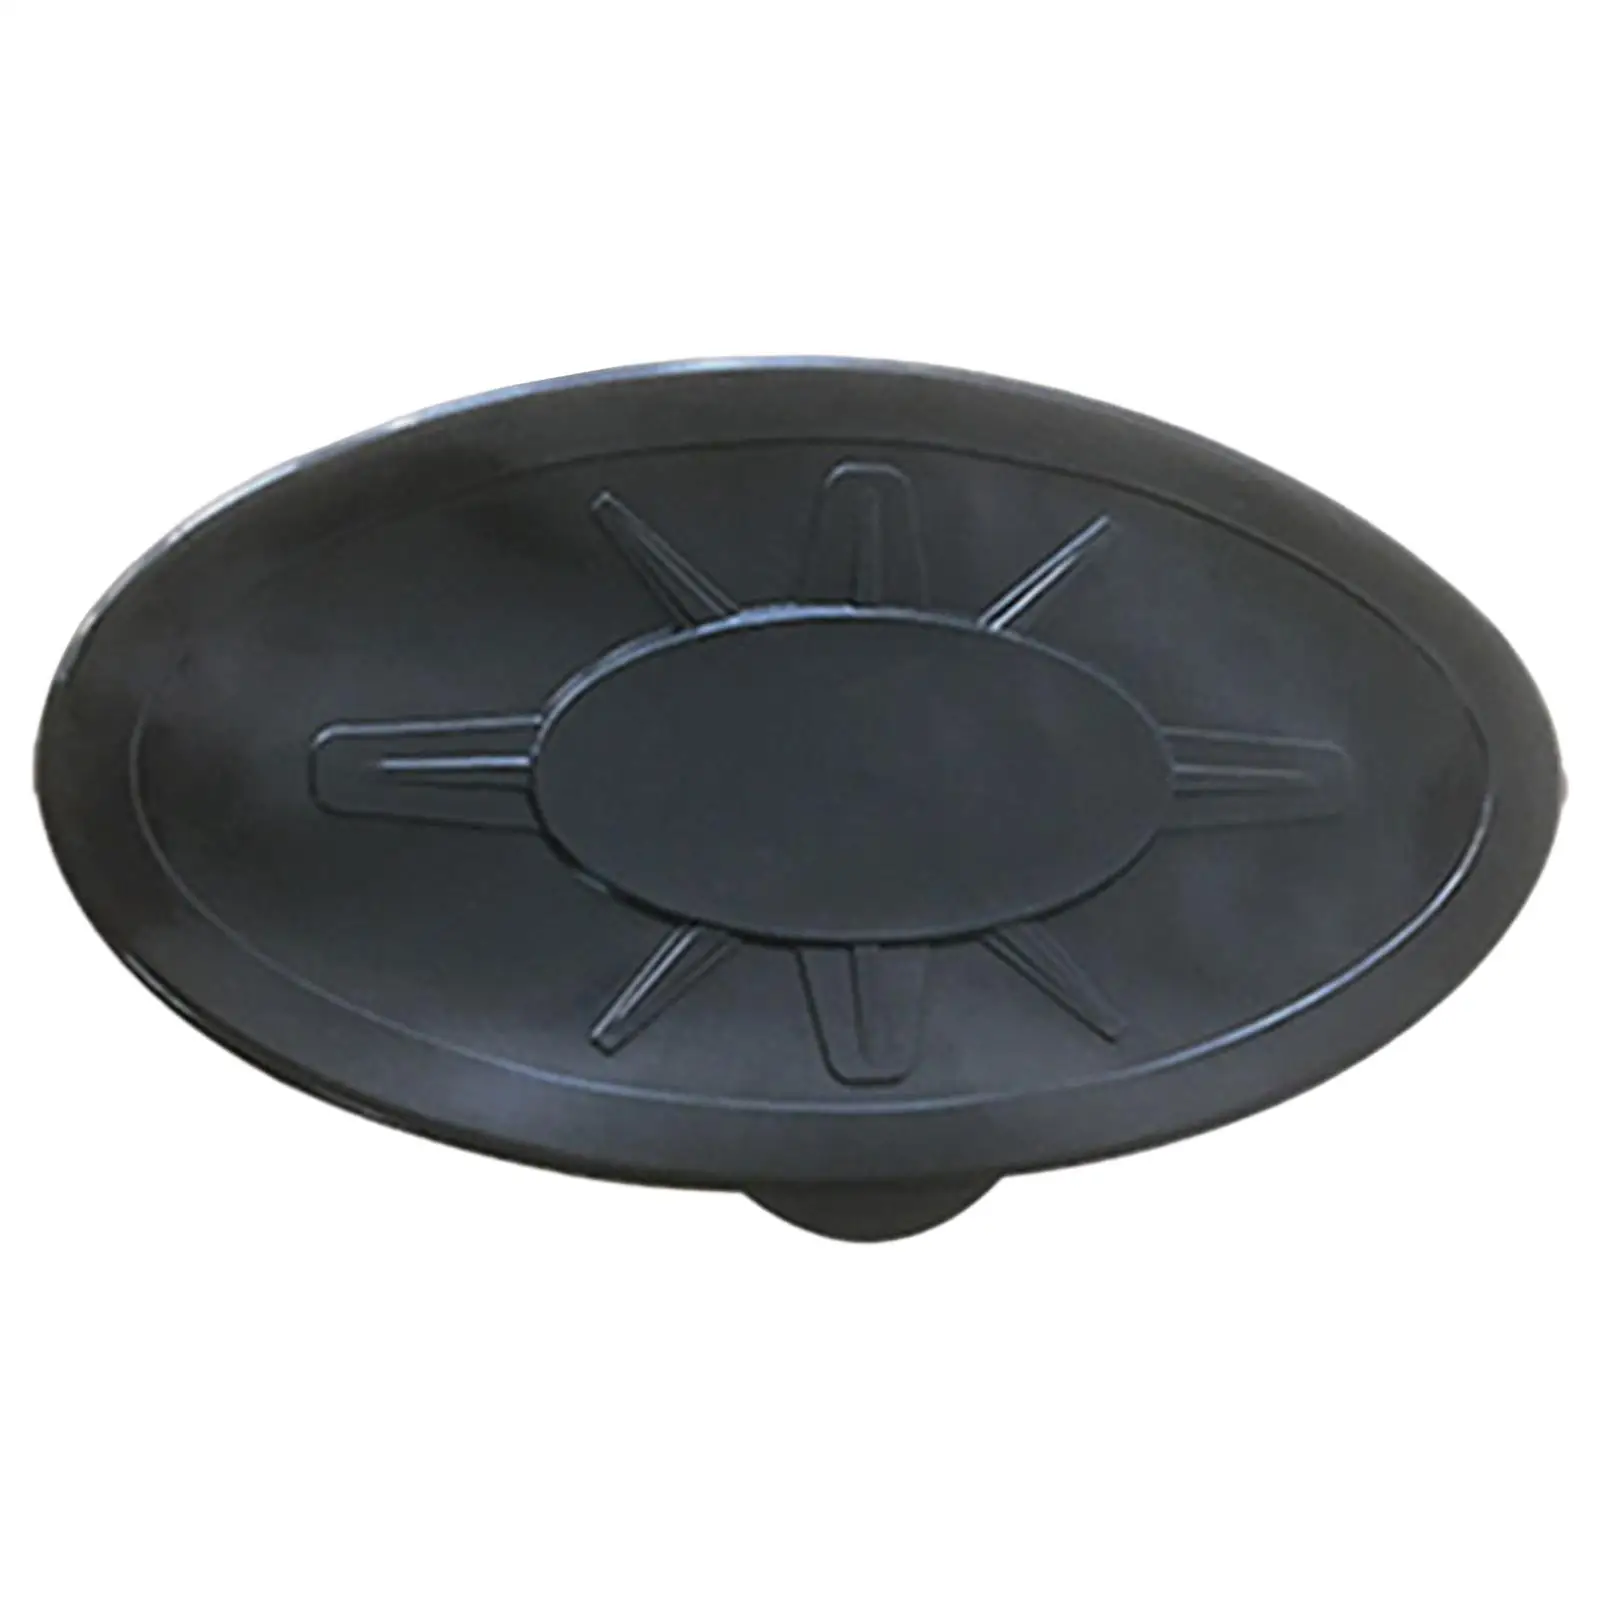 Kayakes Boat Sealing 9 inch Accessories Round/Oval Plate Access